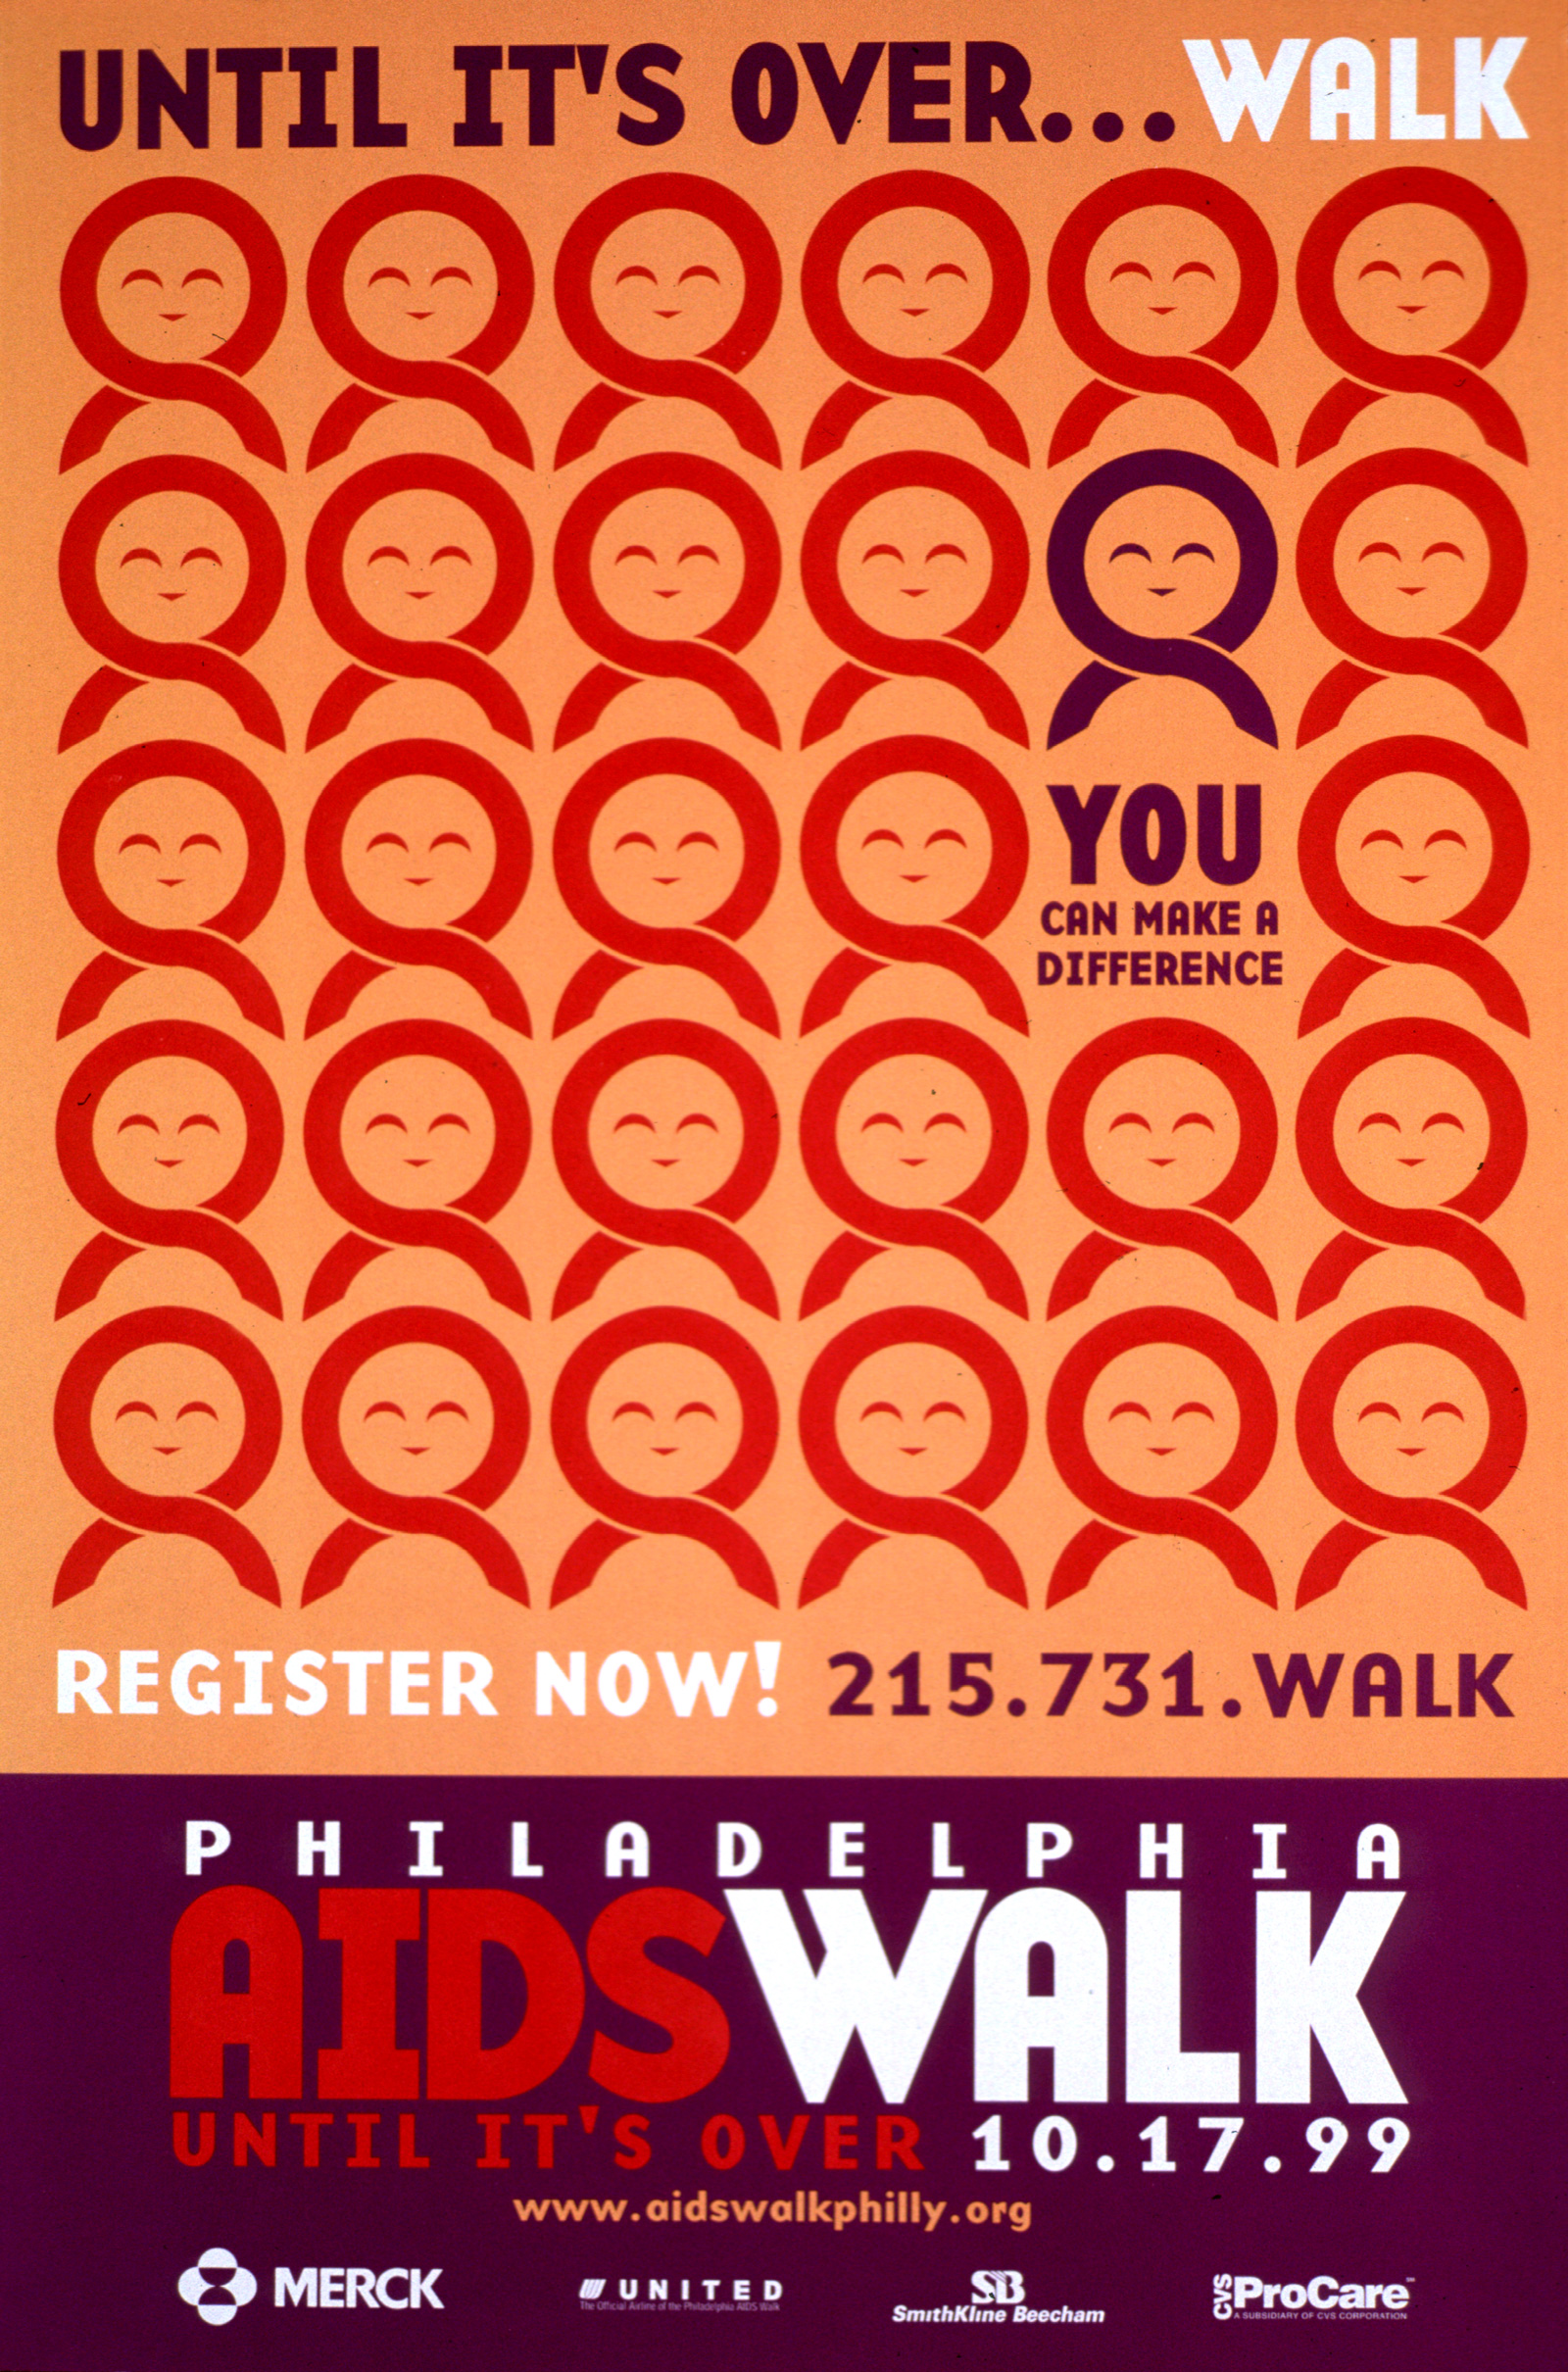 An orange and purple poster with a crowd of abstract figures, above is the title “Until It’s Over…Walk,” and below text information about the “Philadelphia AIDS Walk”